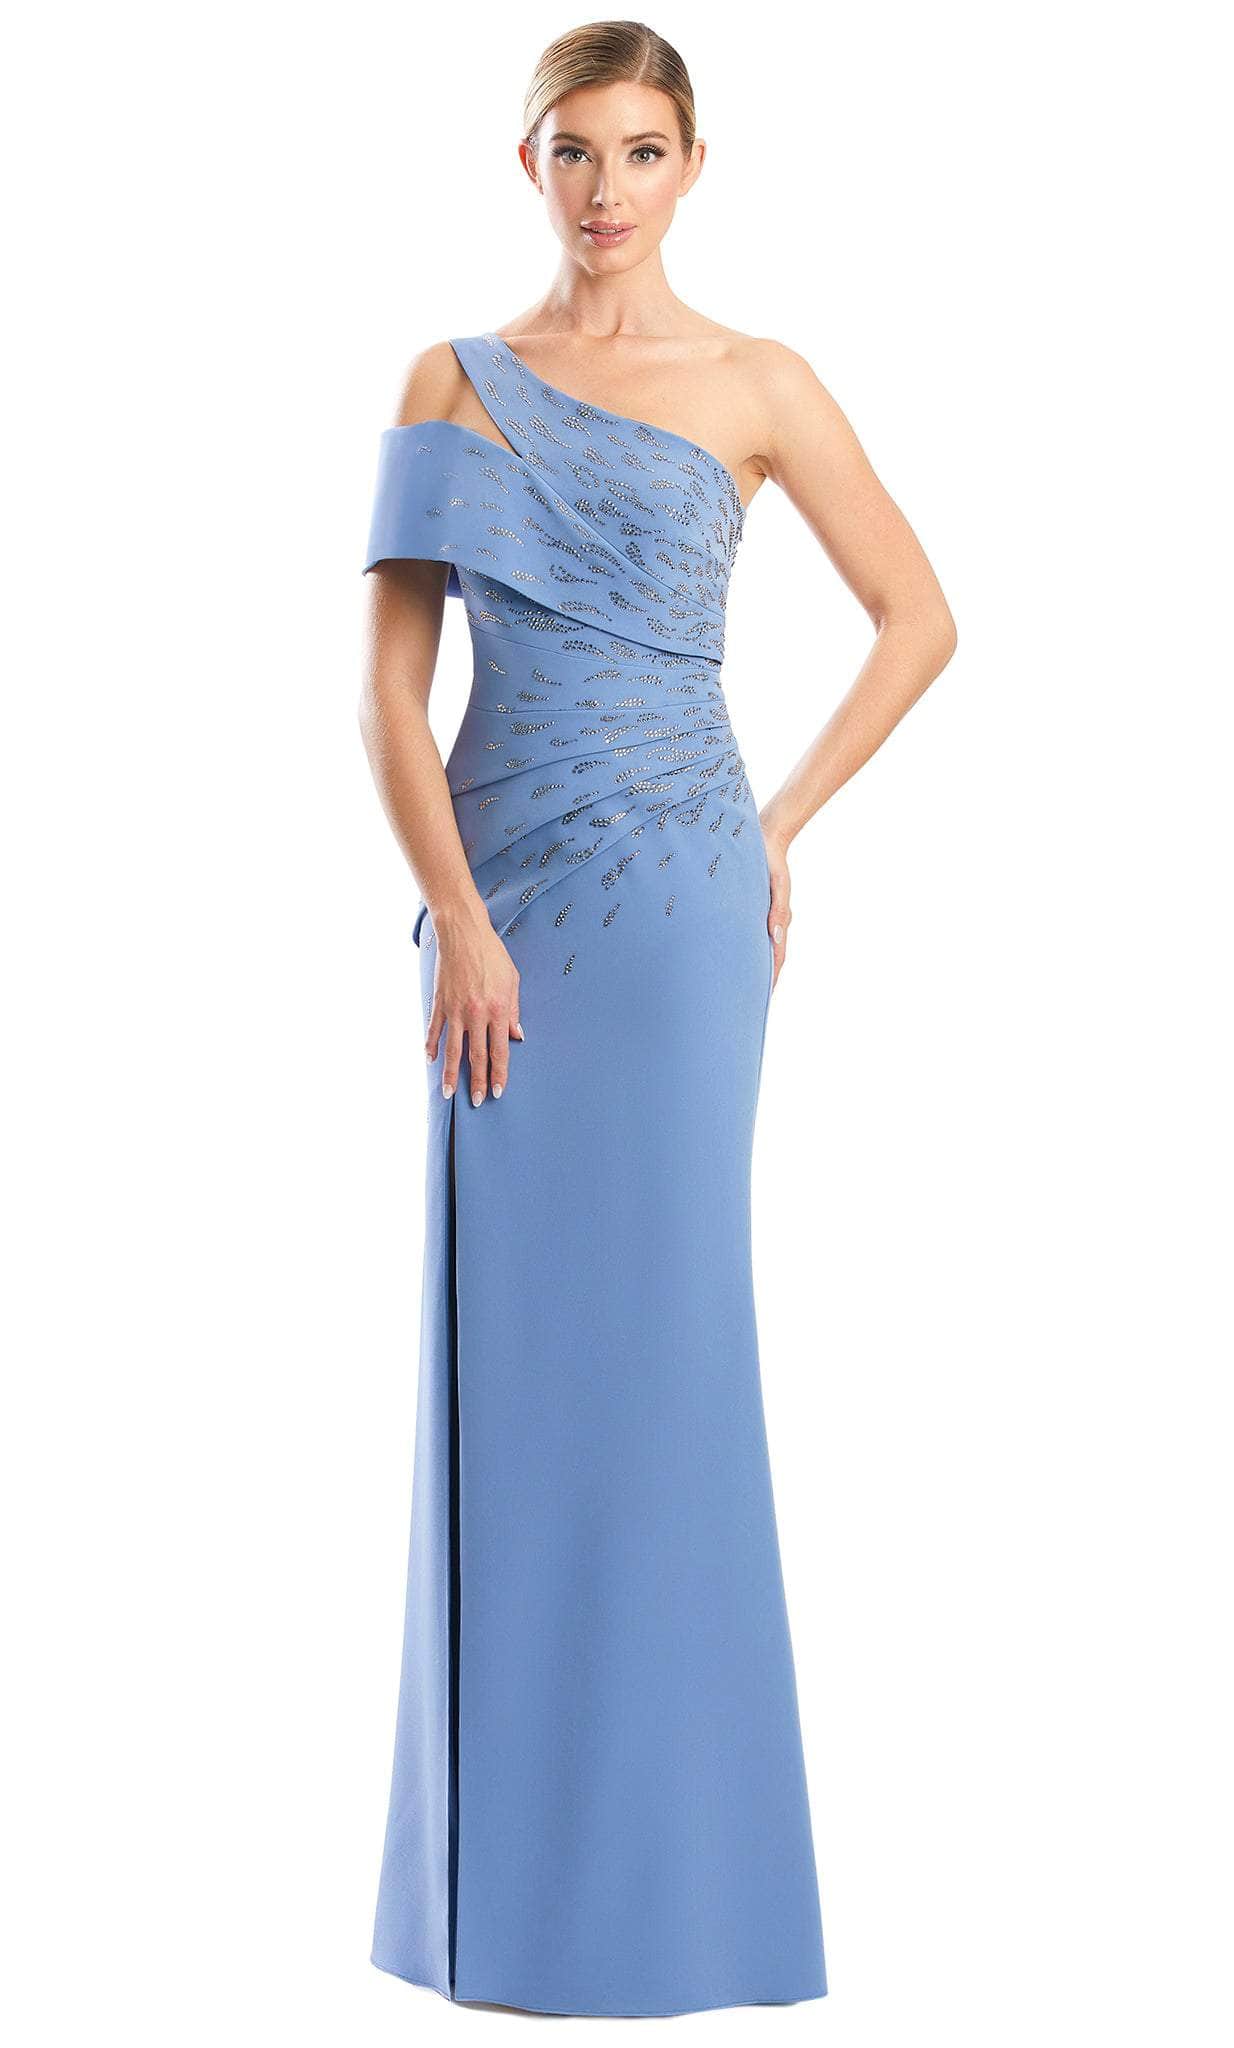 Alexander by Daymor 1784S23 - One Shoulder Long Gown Evening Dresses 00 / Periwinkle